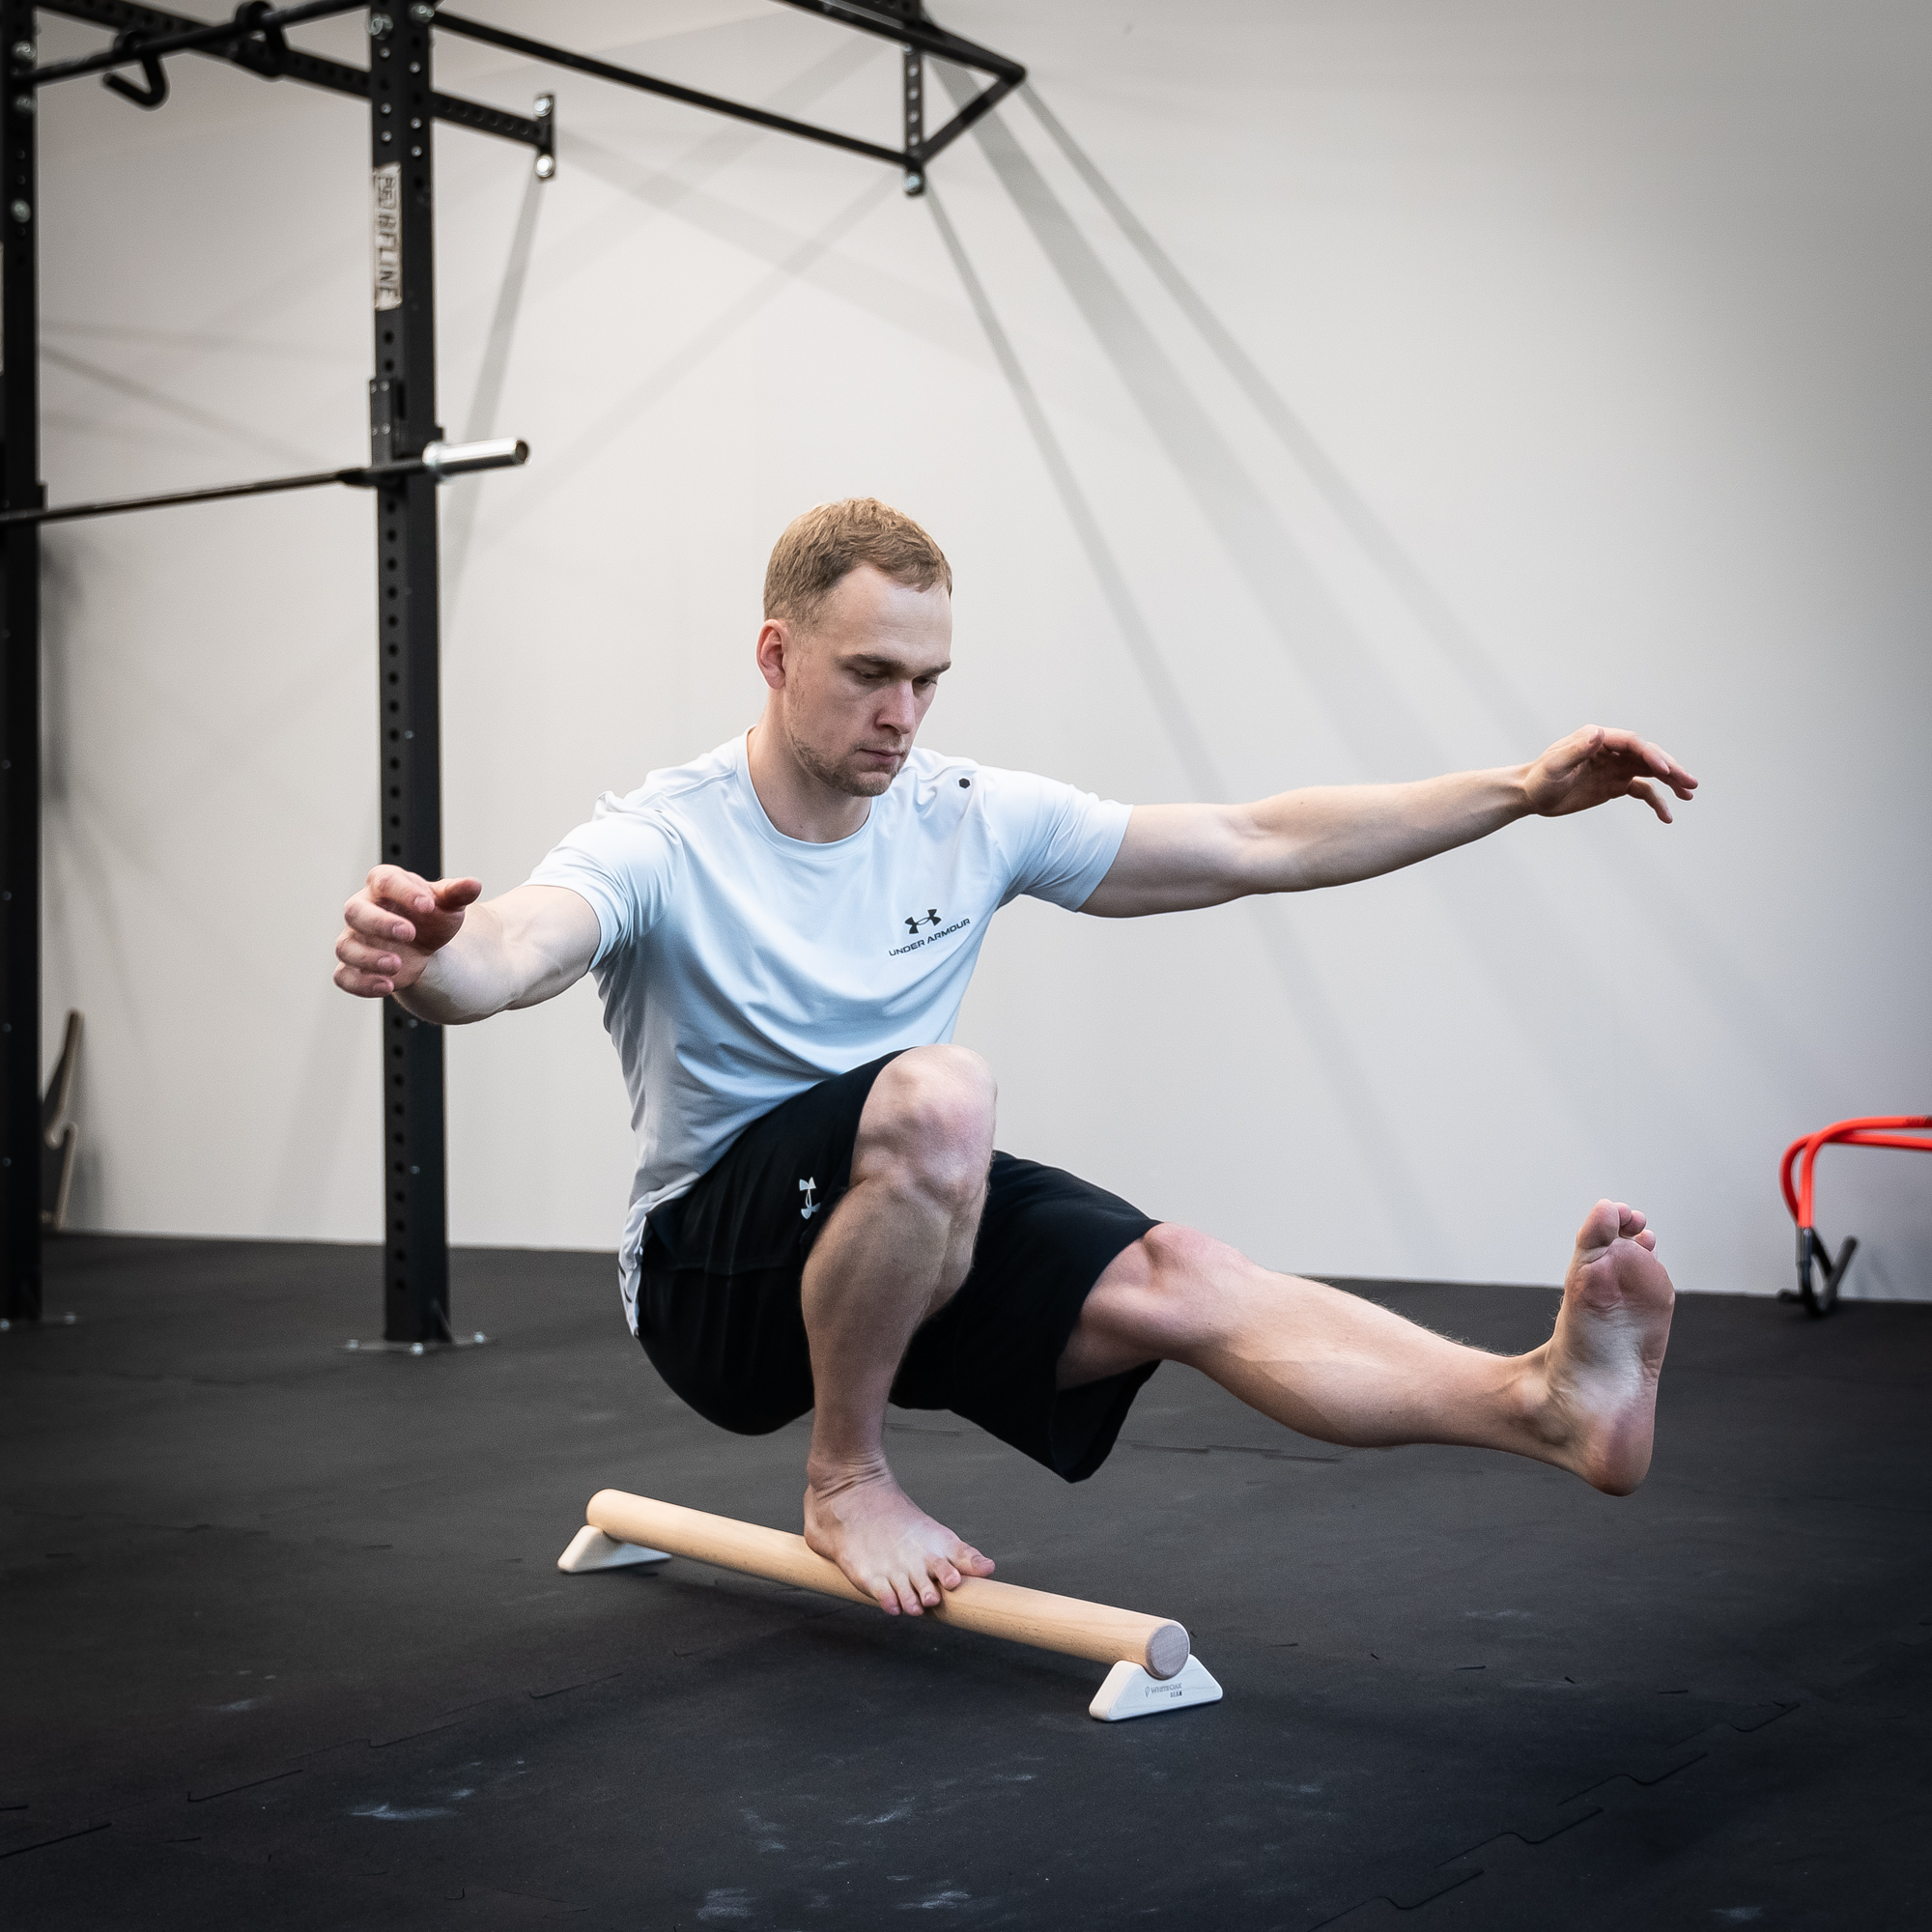 Why work on mobility, balance and coordination?